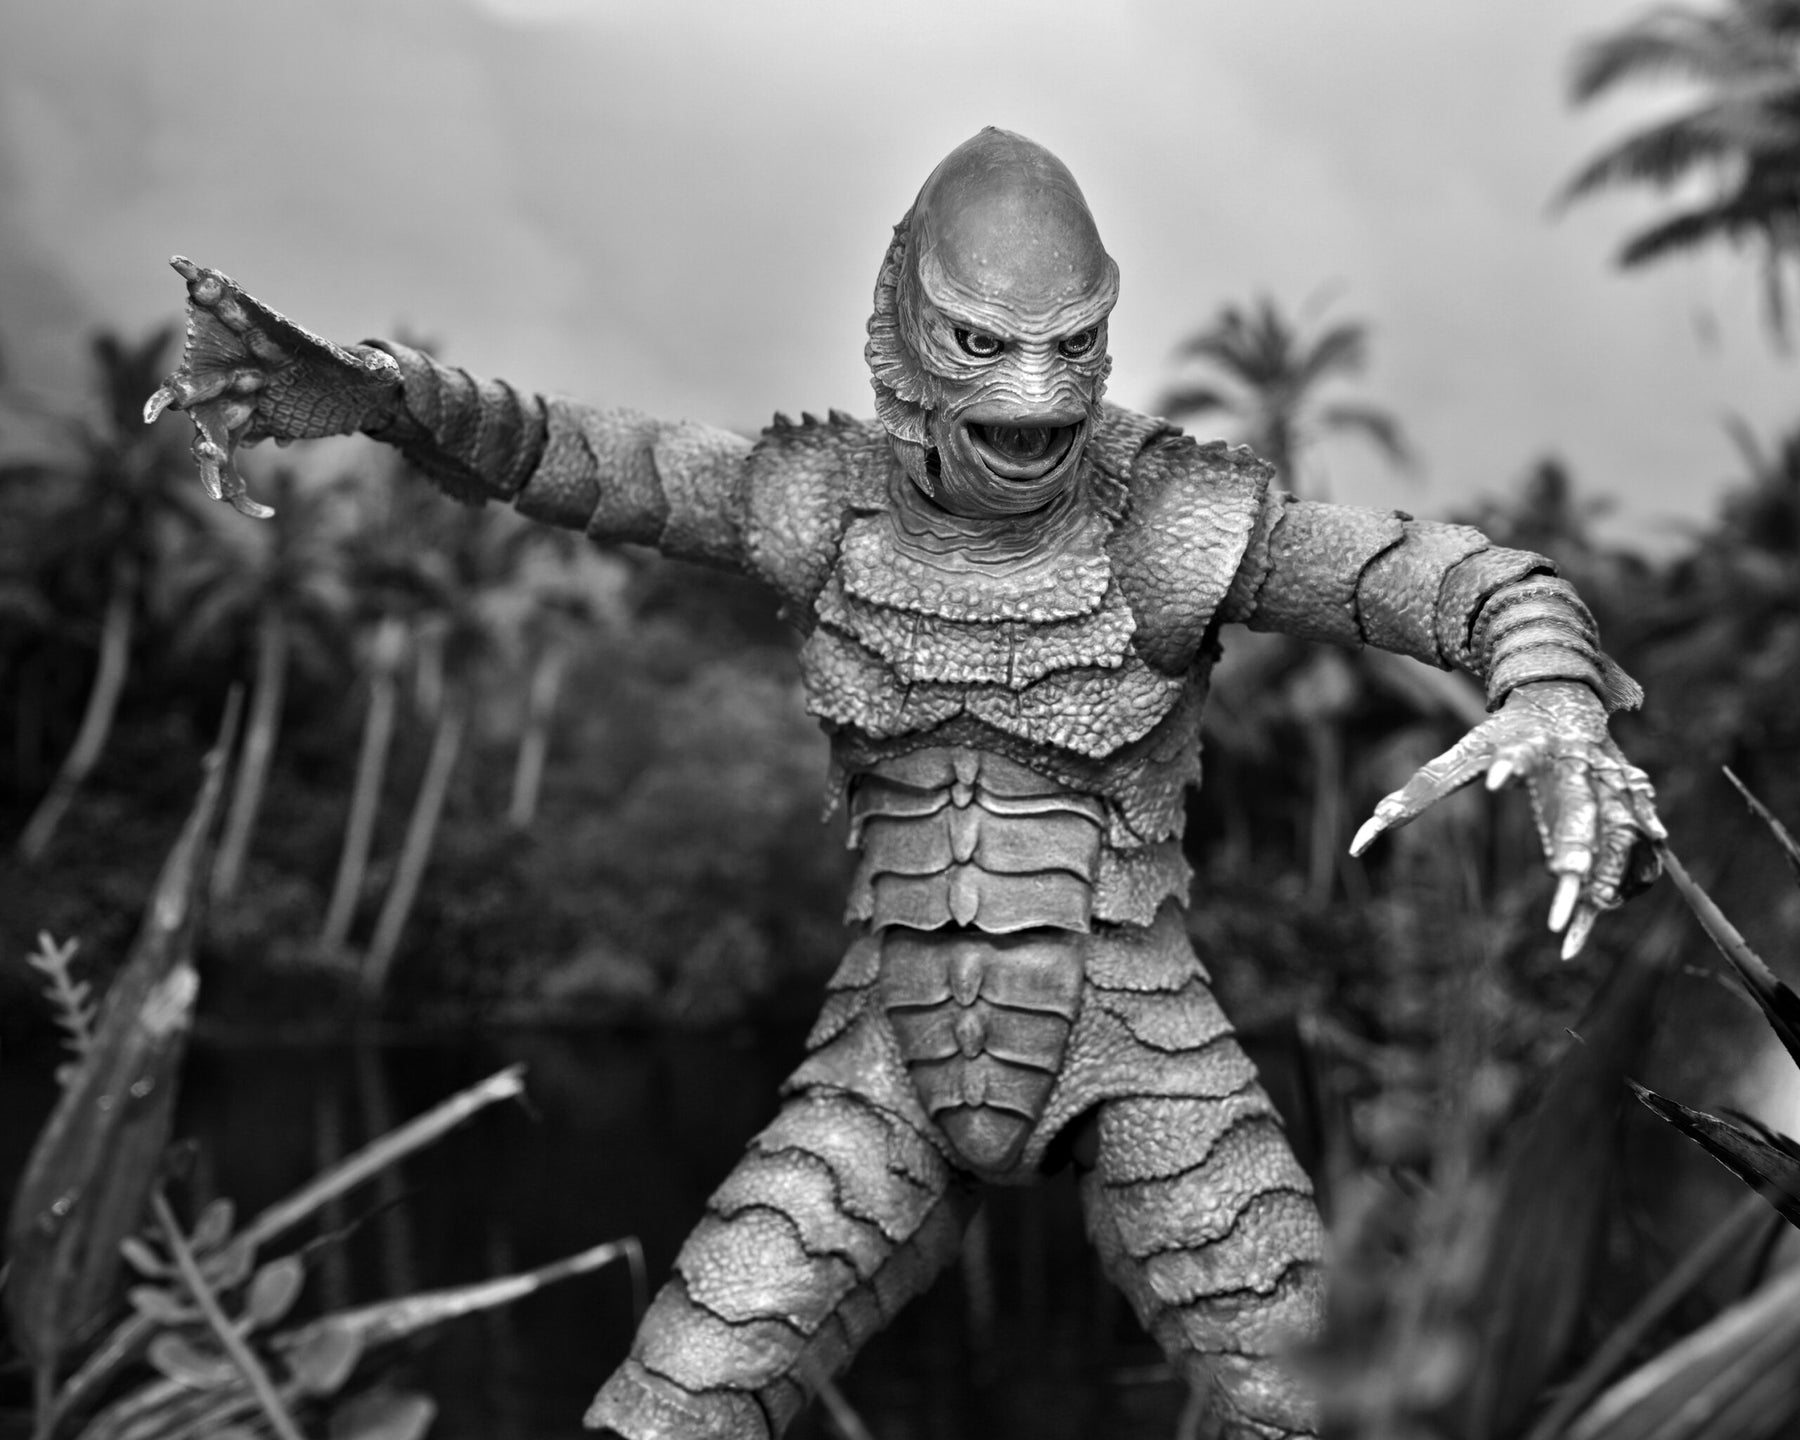 NECA Universal Monsters Ultimate Creature from the Black Lagoon (B&W) 7” Action Figure